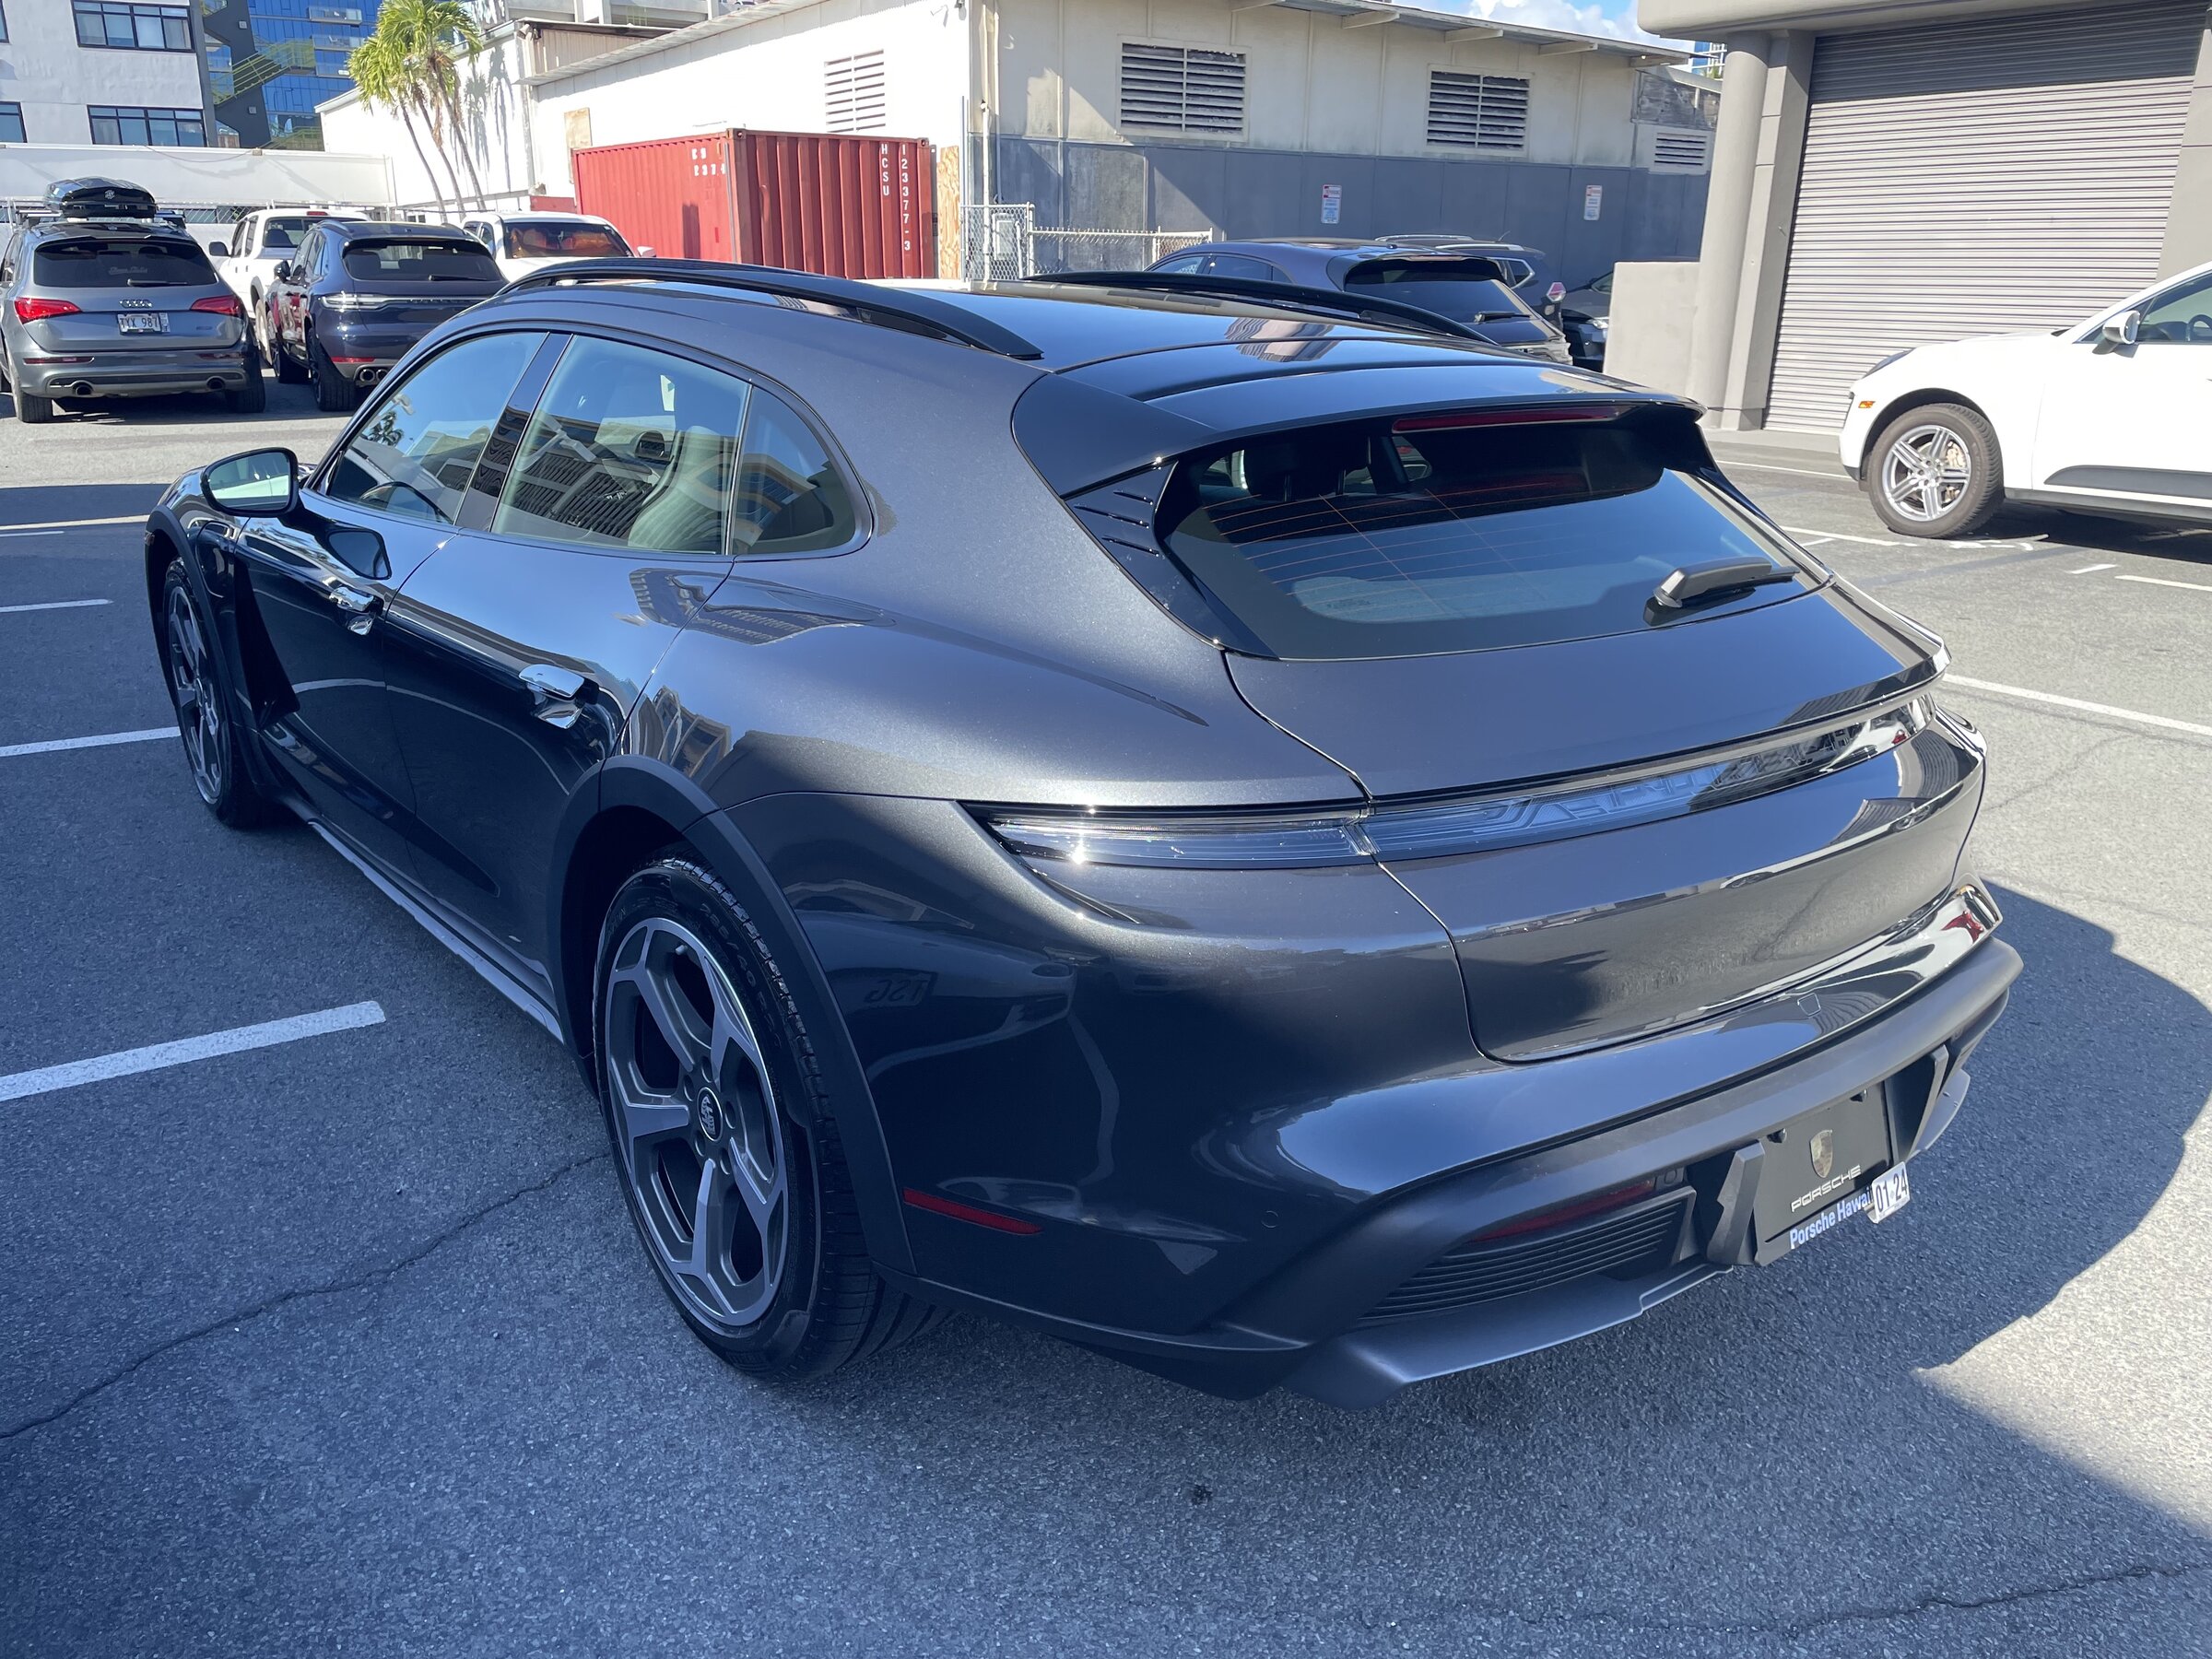 Porsche Taycan Another Hawaii Cross Turismo delivered. CT4S Dolomite. Taycan CT4 outside